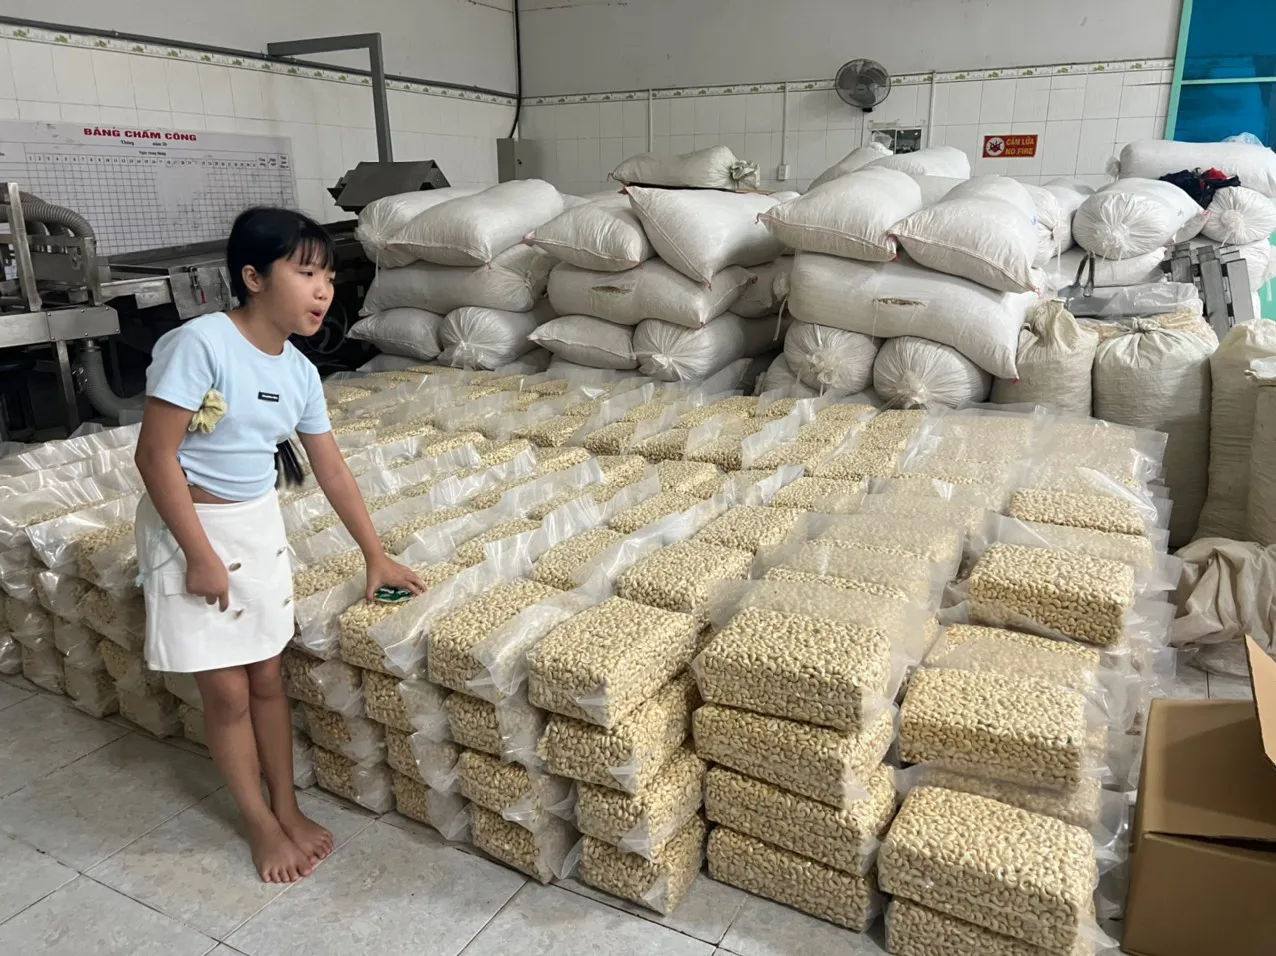 3 Tons Of W320 Cashew With 1st Quality - Packed 5 KG / Bag - Kimmy Farm Vietnam